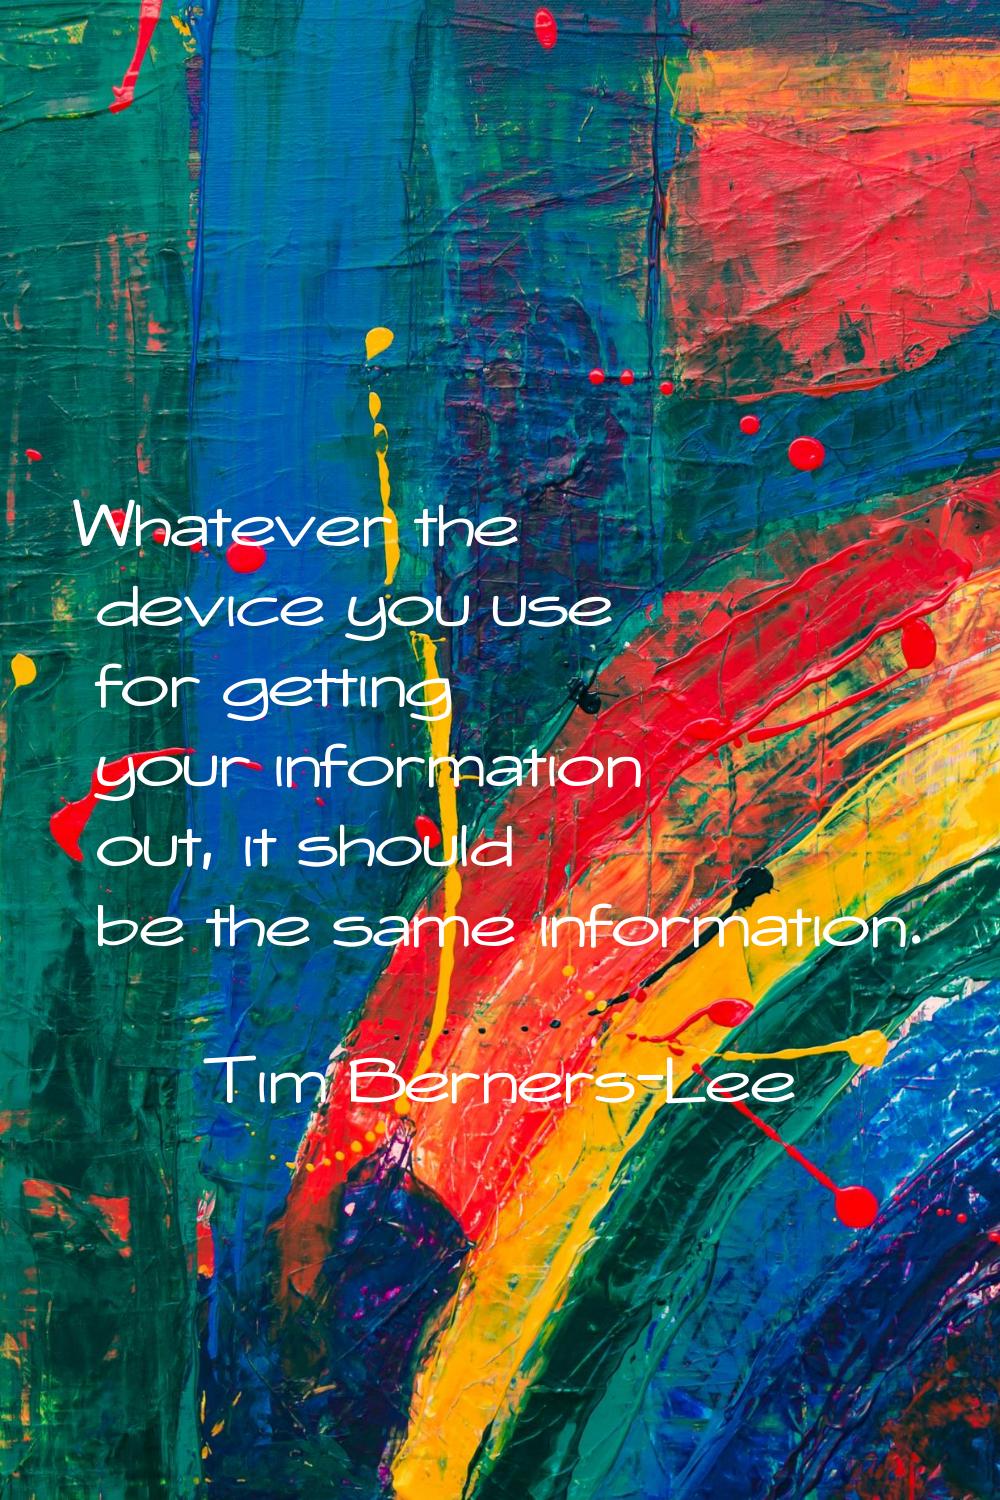 Whatever the device you use for getting your information out, it should be the same information.